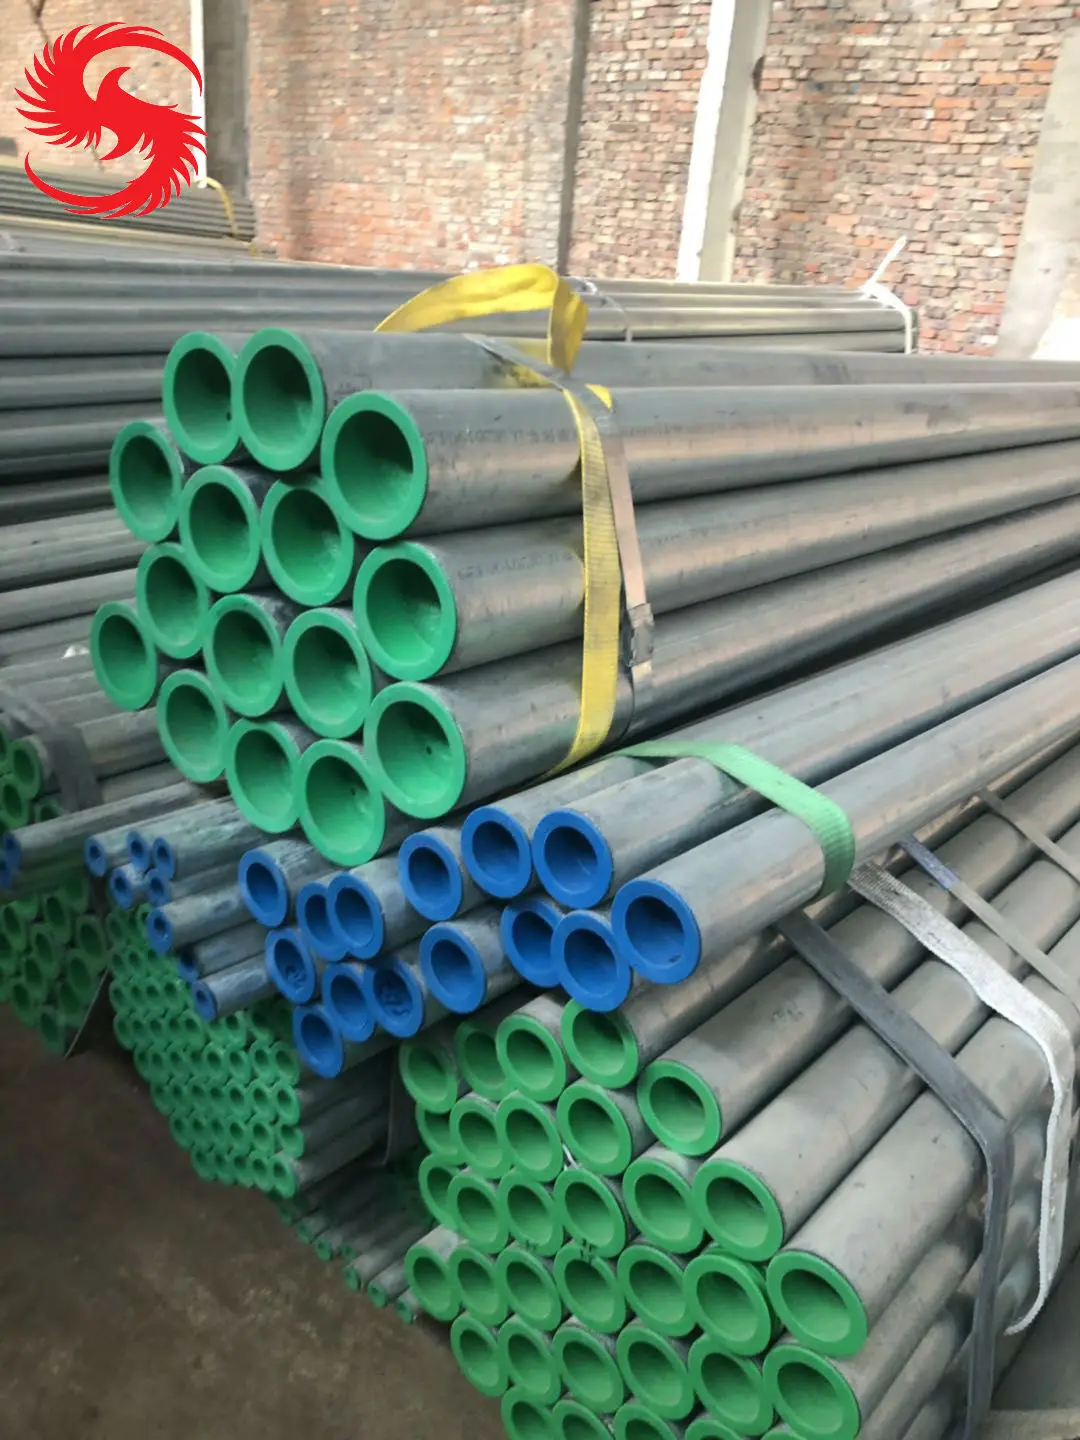 hot dipped galvanized steel tube with plastic lining